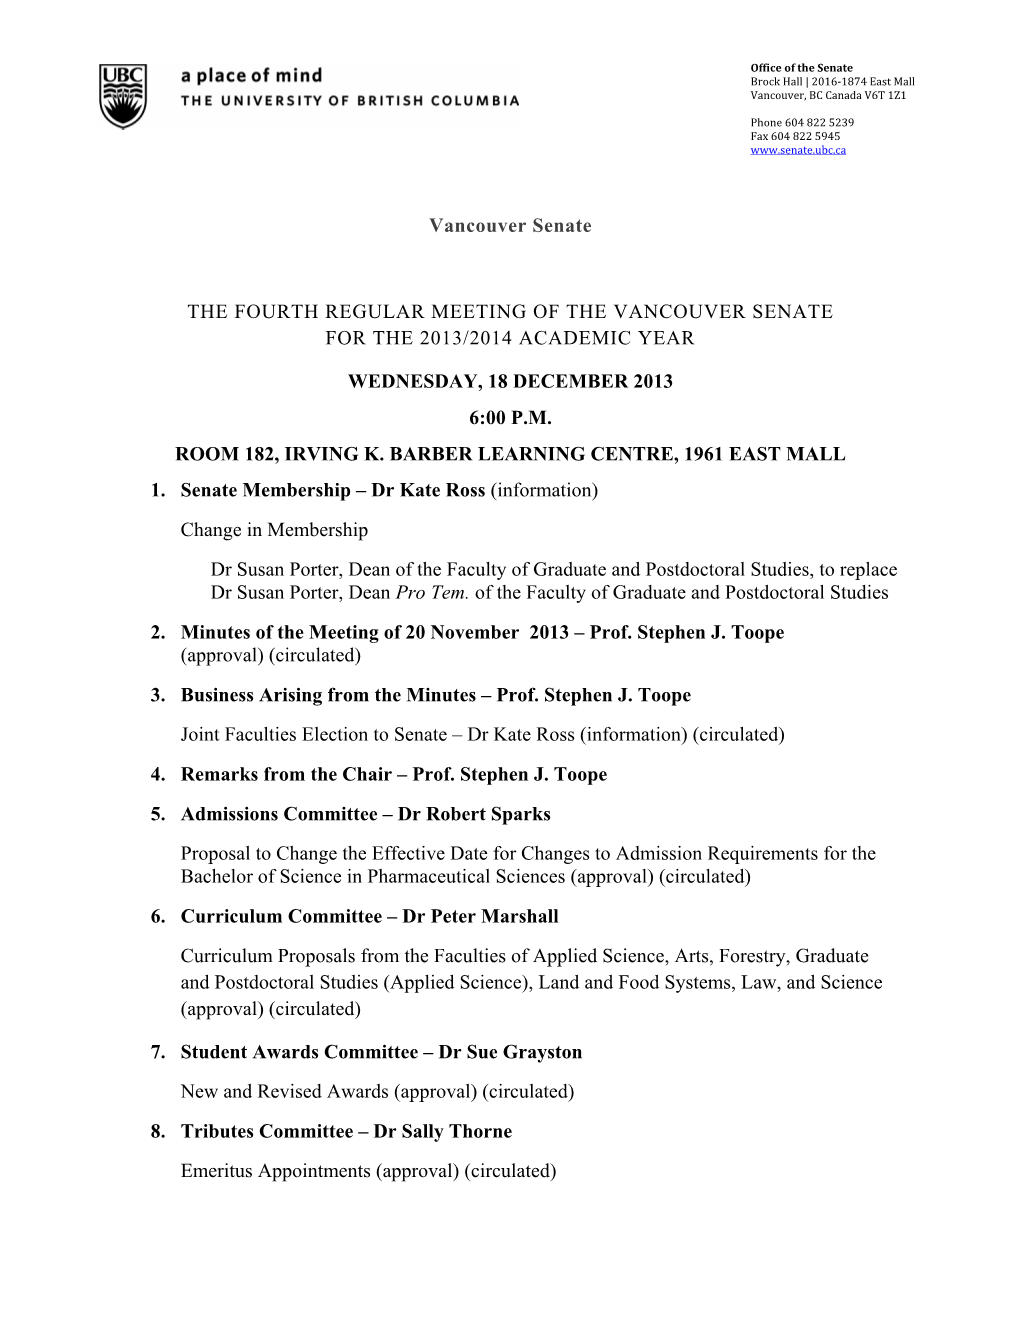 Downloads/2013__Elections Regs.Pdf), I Report to Senate in Response to the Query Raised